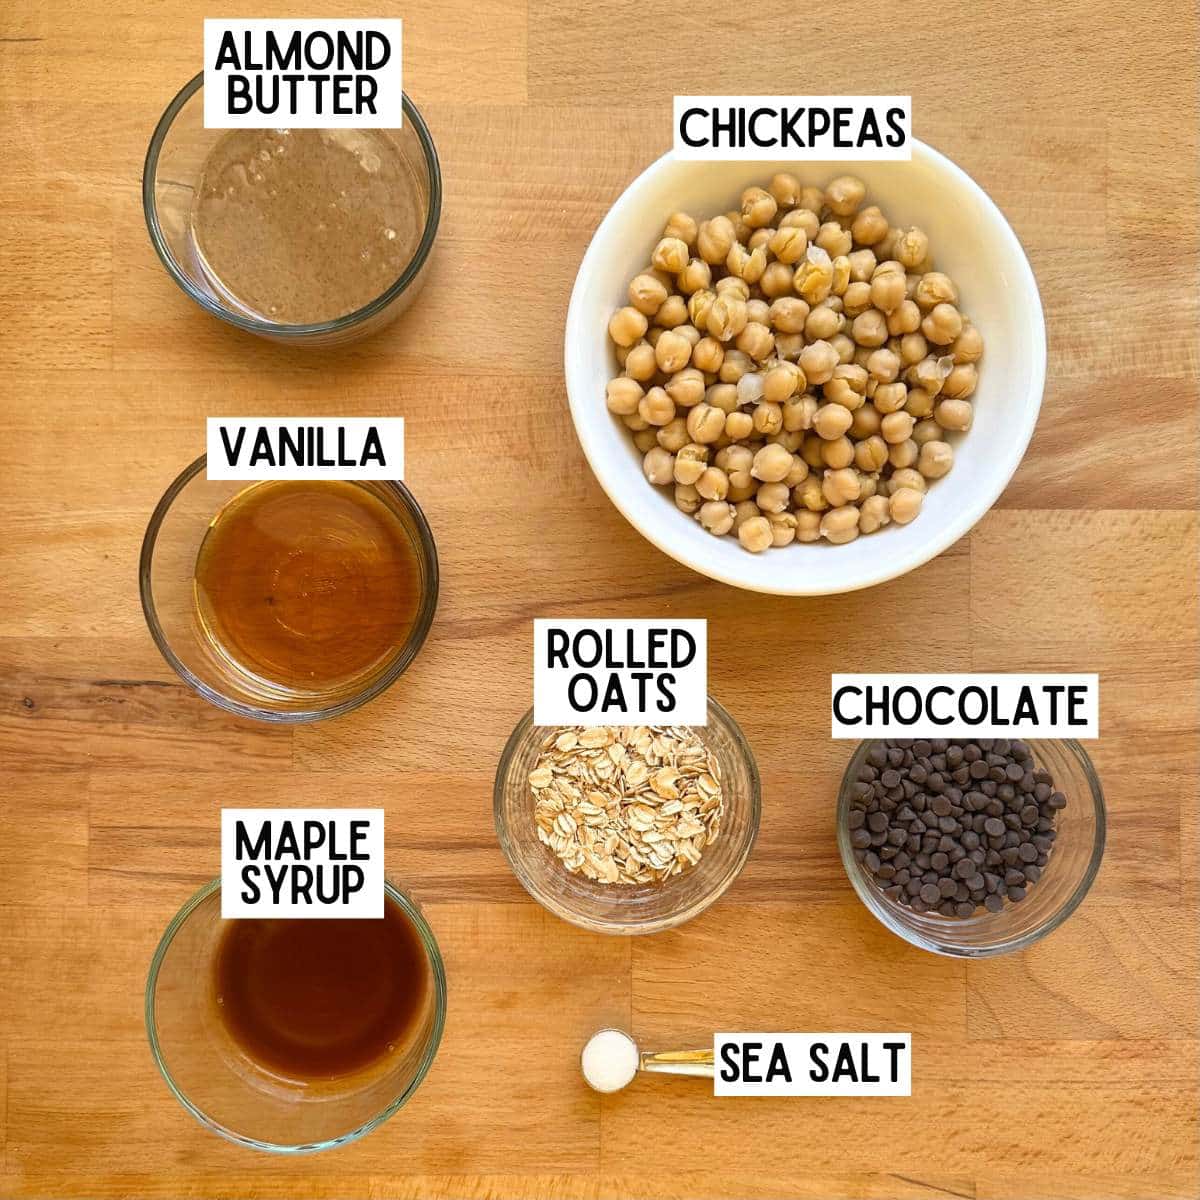 Ingredients to make chickpea cookie dough with corresponding labels: almond butter, chickpeas, vanilla, maple syrup, rolled oats, chocolate, and sea salt.